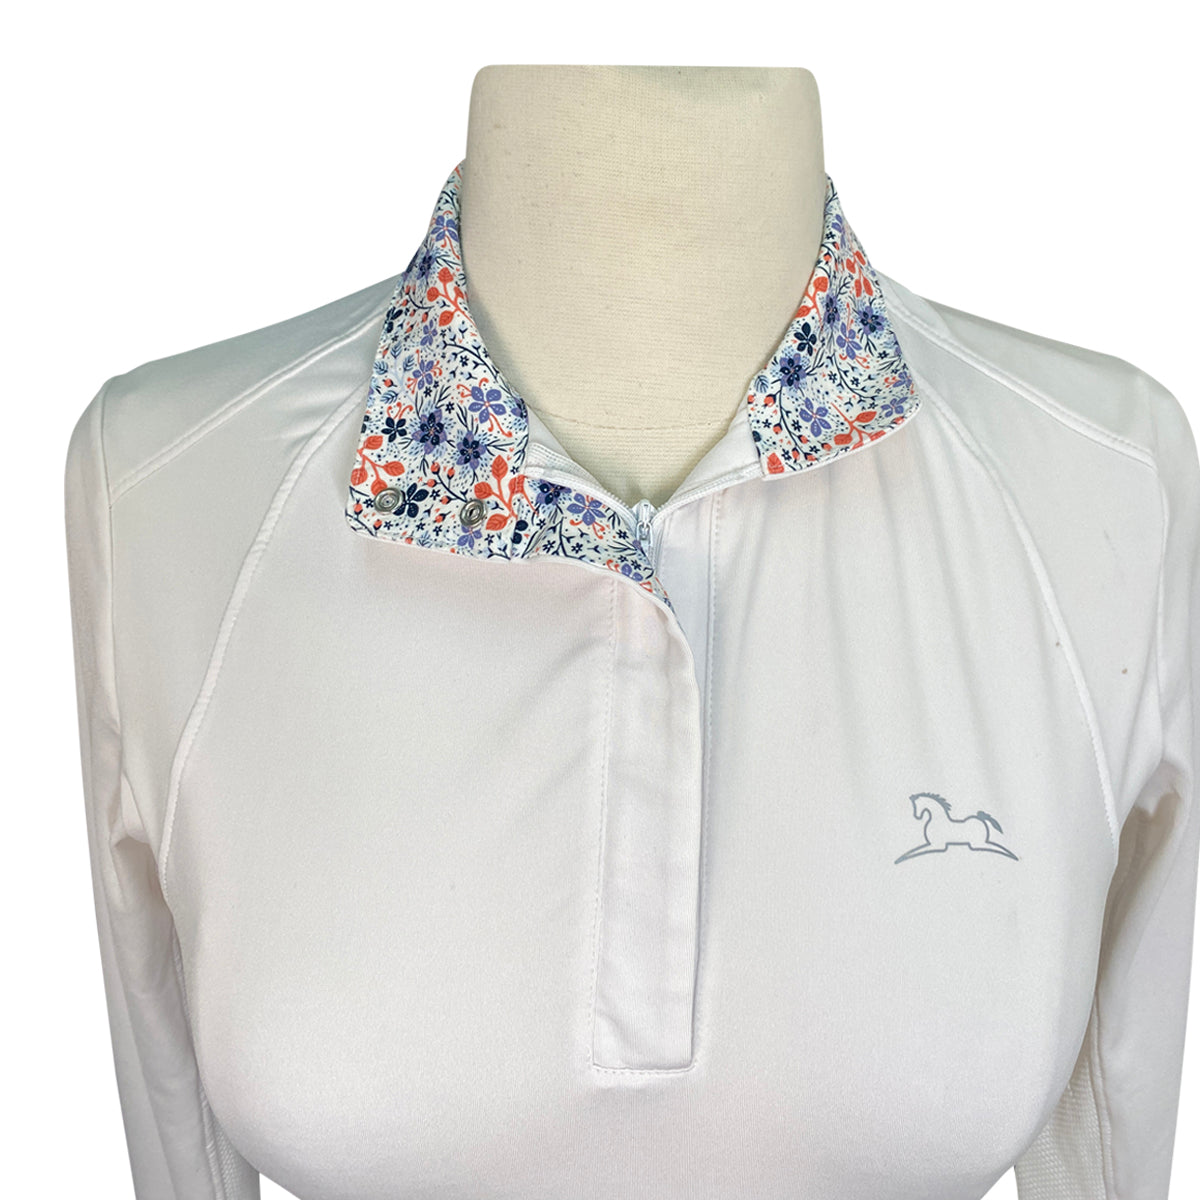 R.J. Classics &#39;Maddie&#39; Show Shirt in White w/Floral Pattern